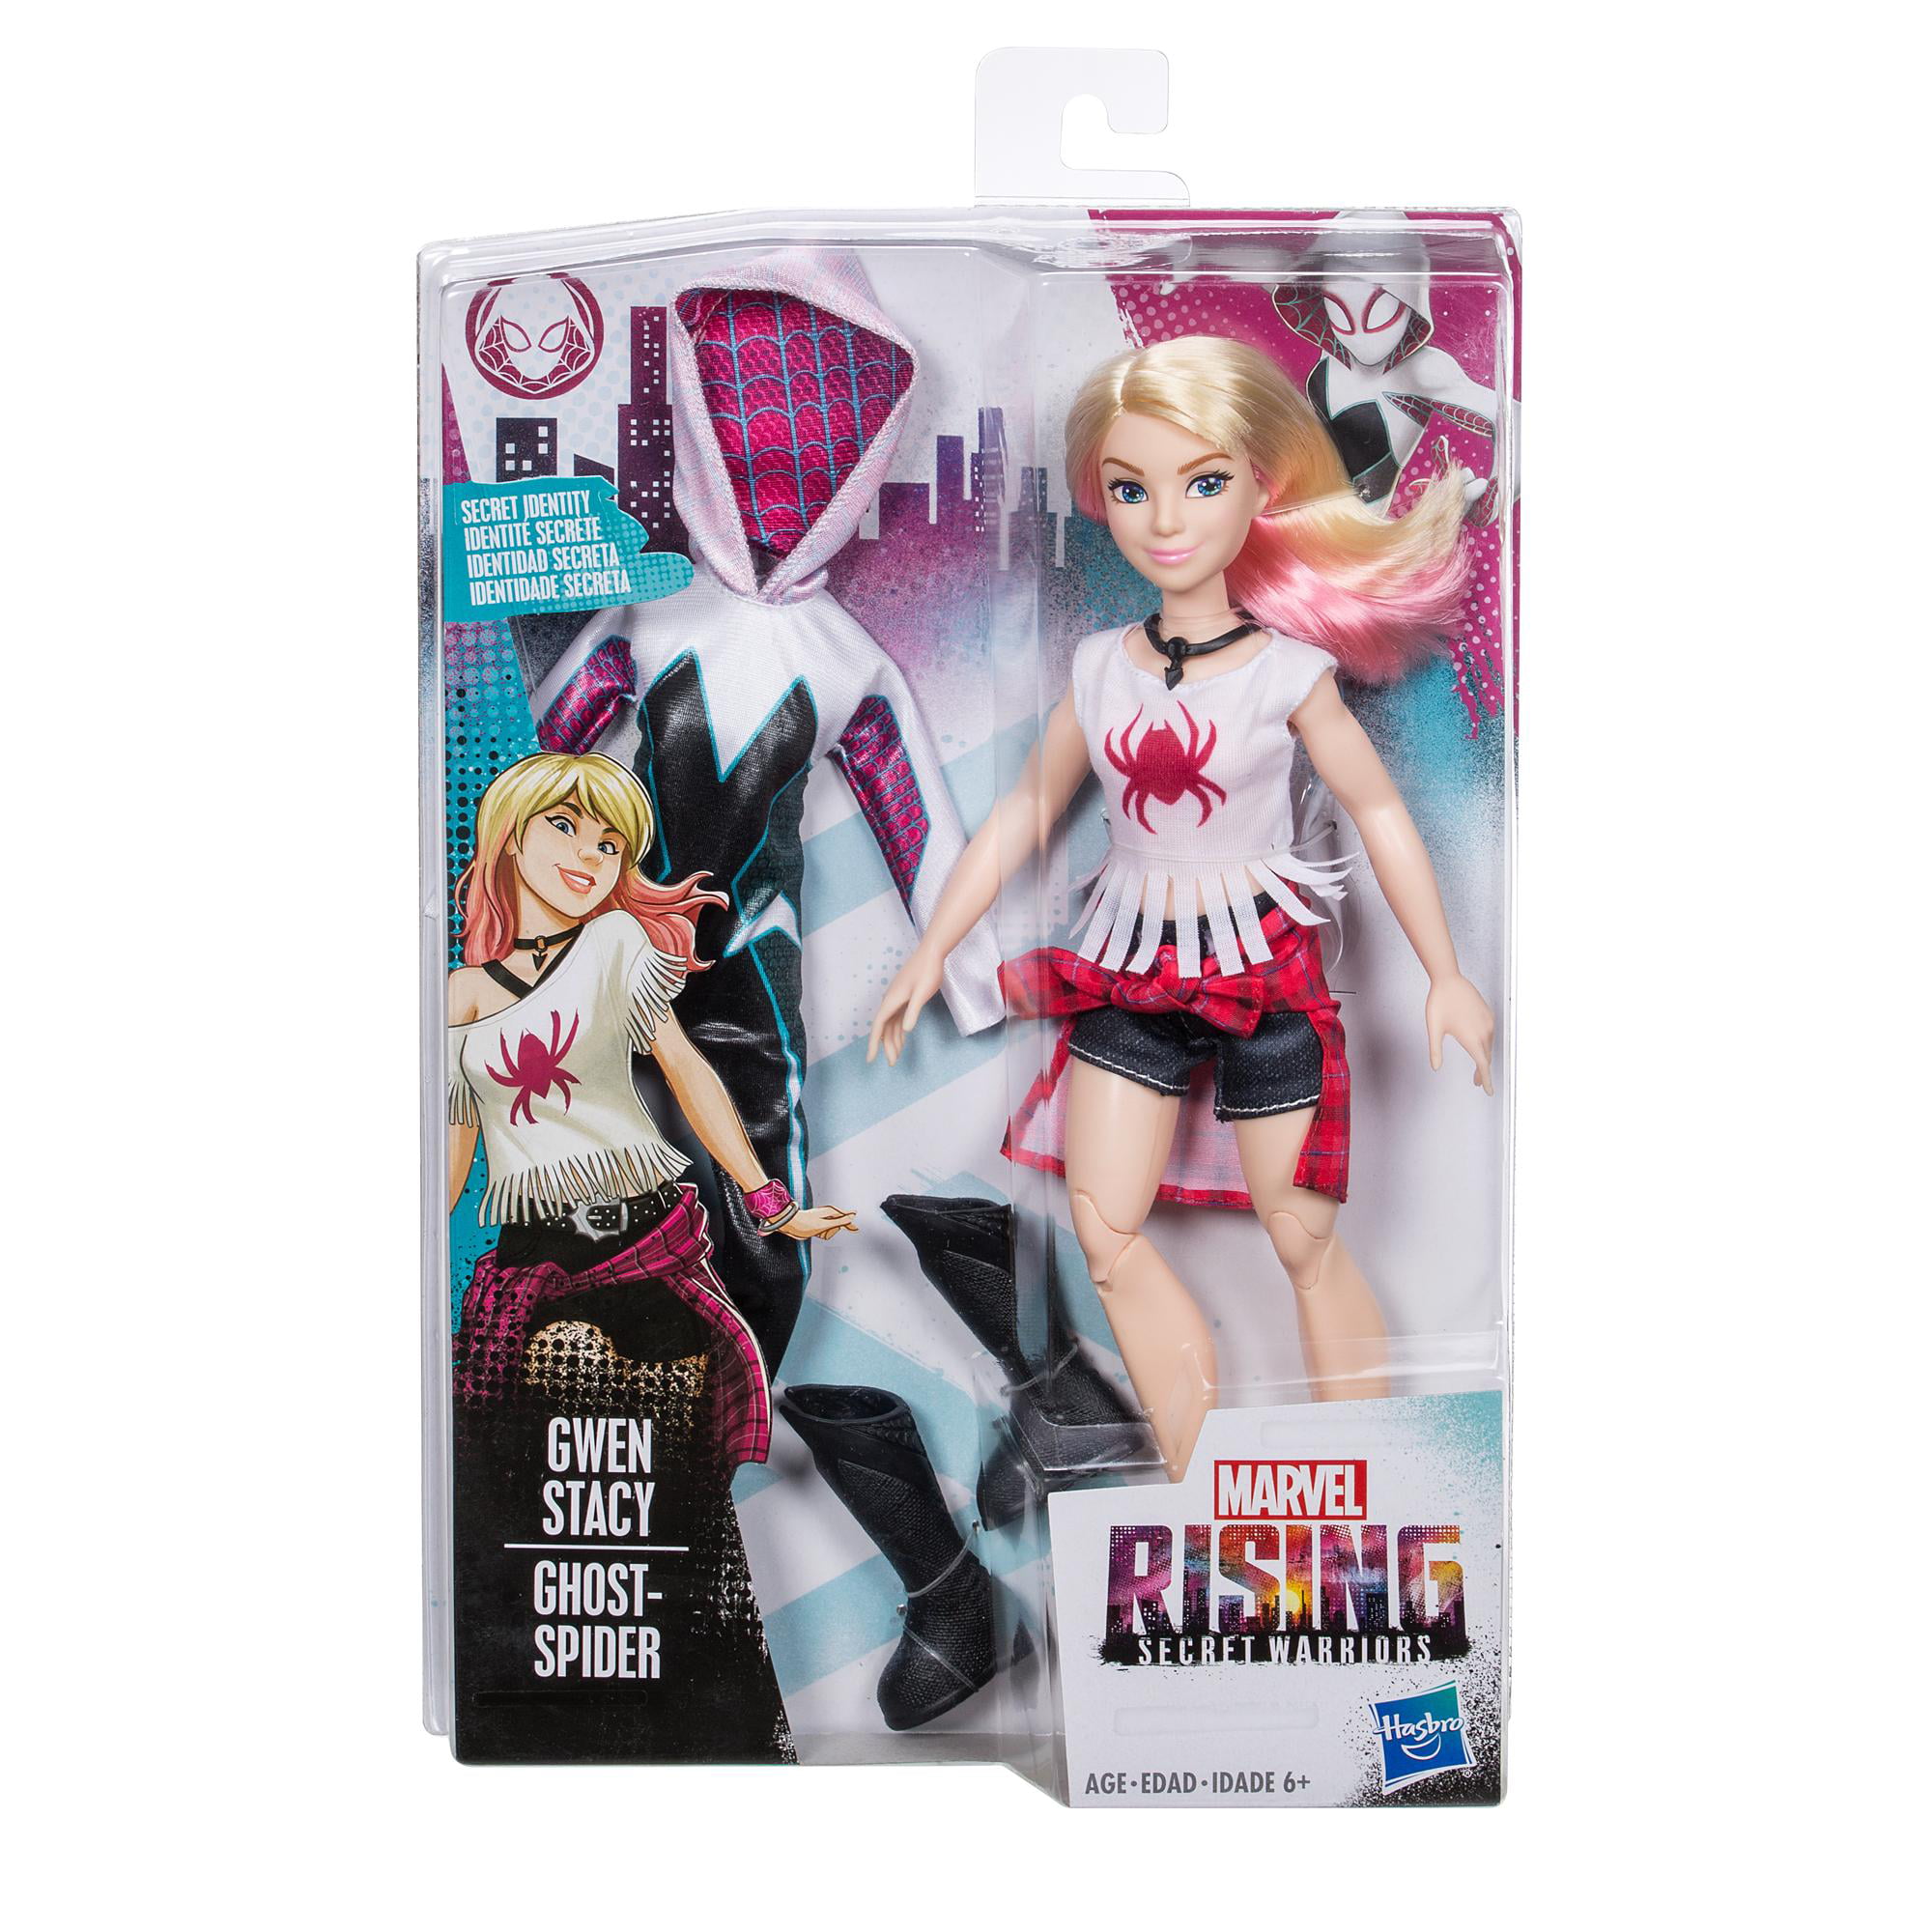 Marvel Rising Secret Warriors GHOST-SPIDER Hasbro Gwen Stacy NEW IN BOX 